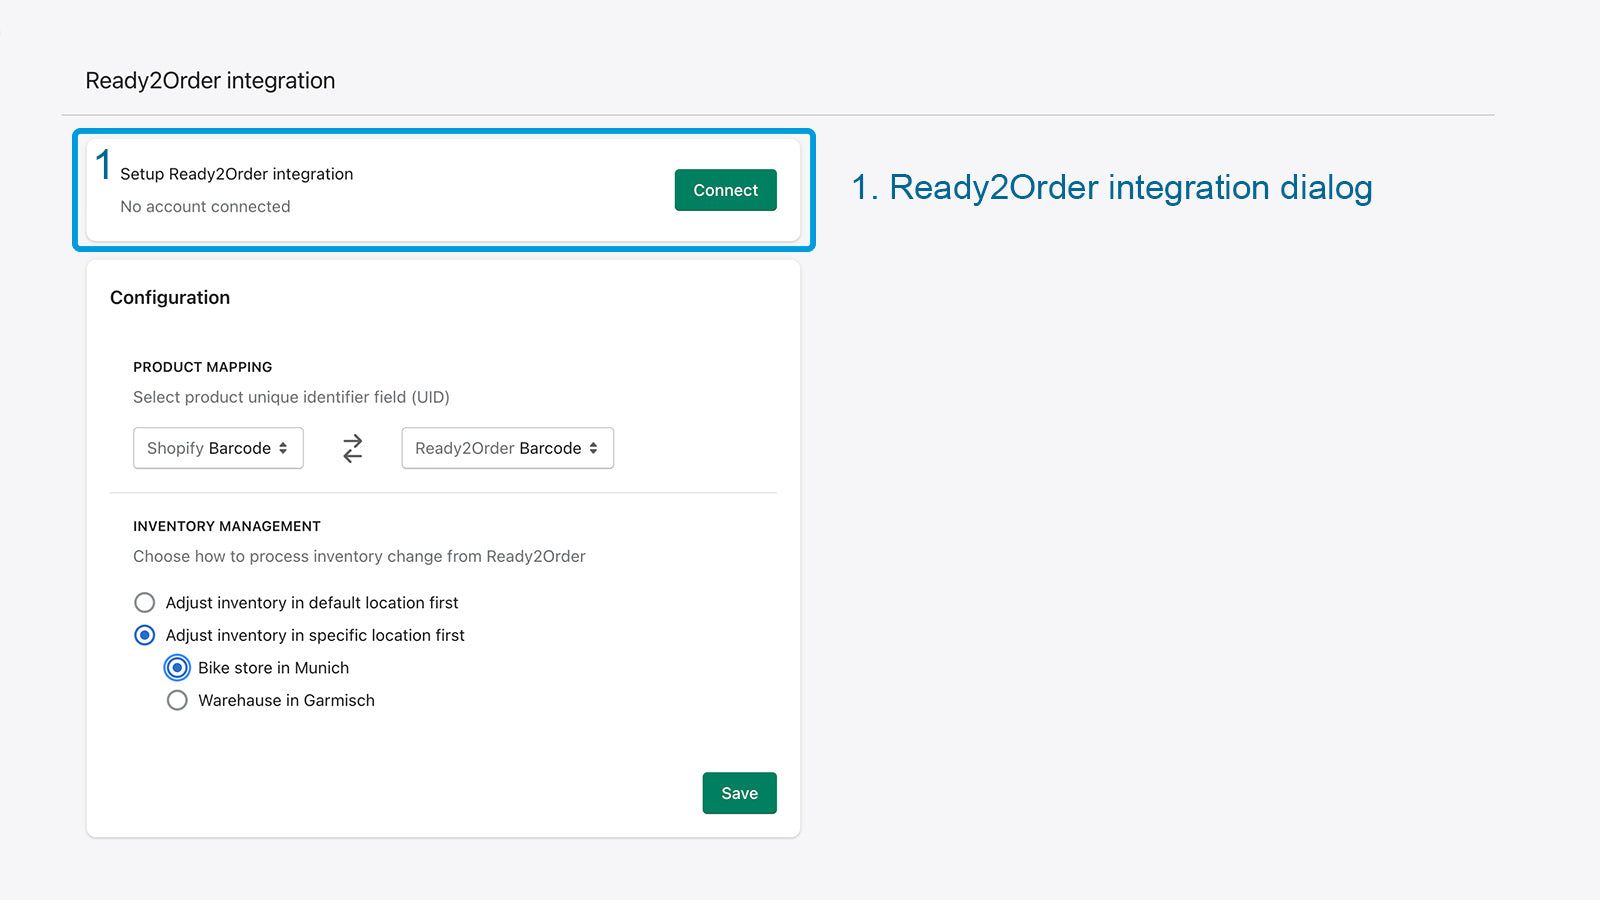 Connect to Ready2Order